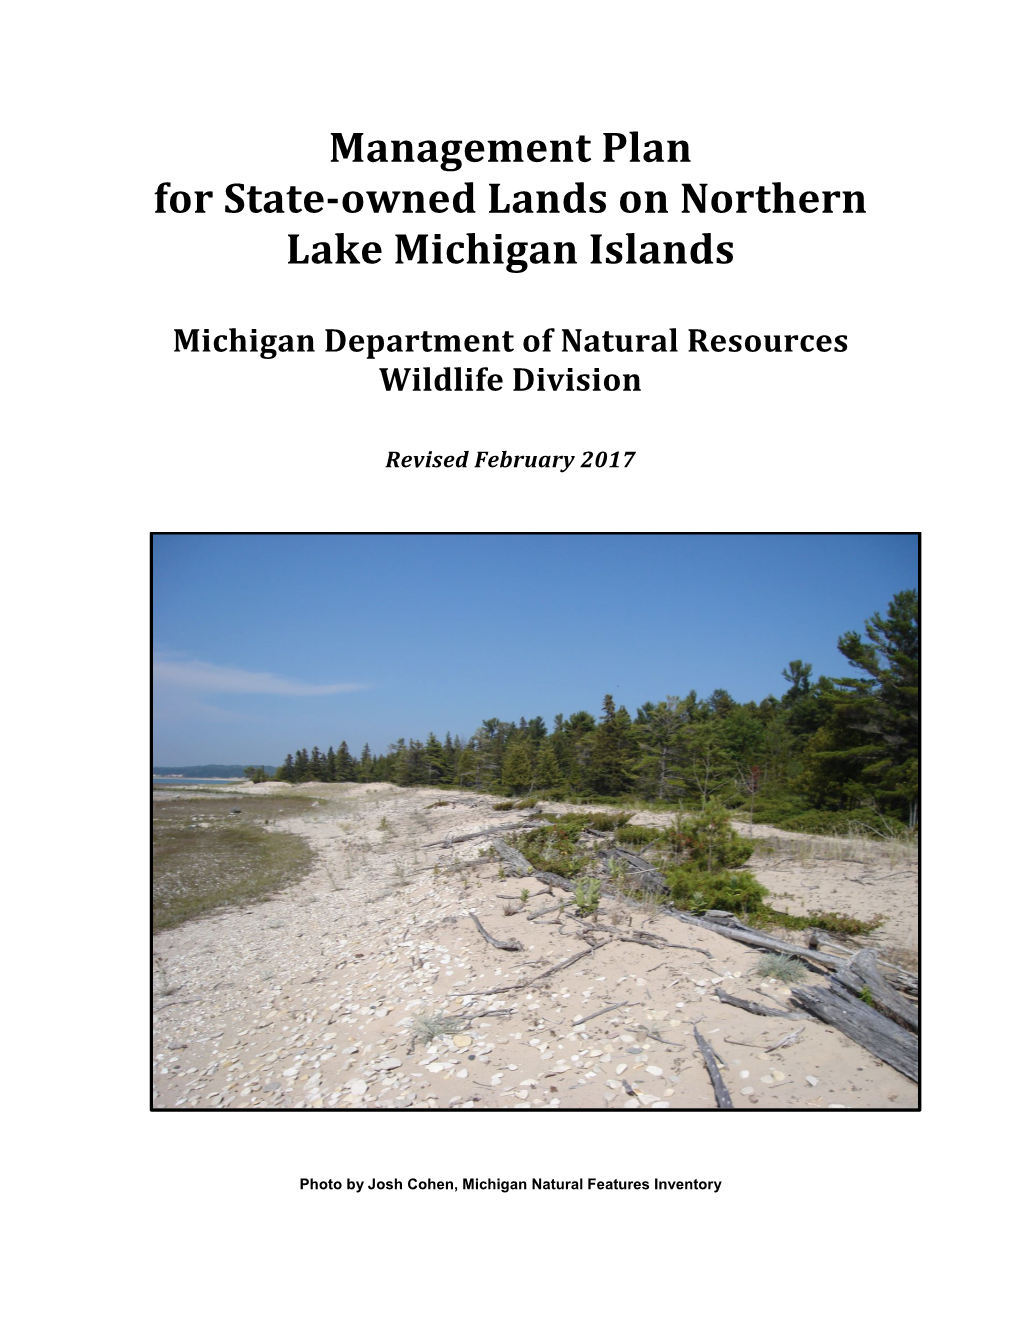 Management Plan for State-Owned Lands on Northern Lake Michigan Islands